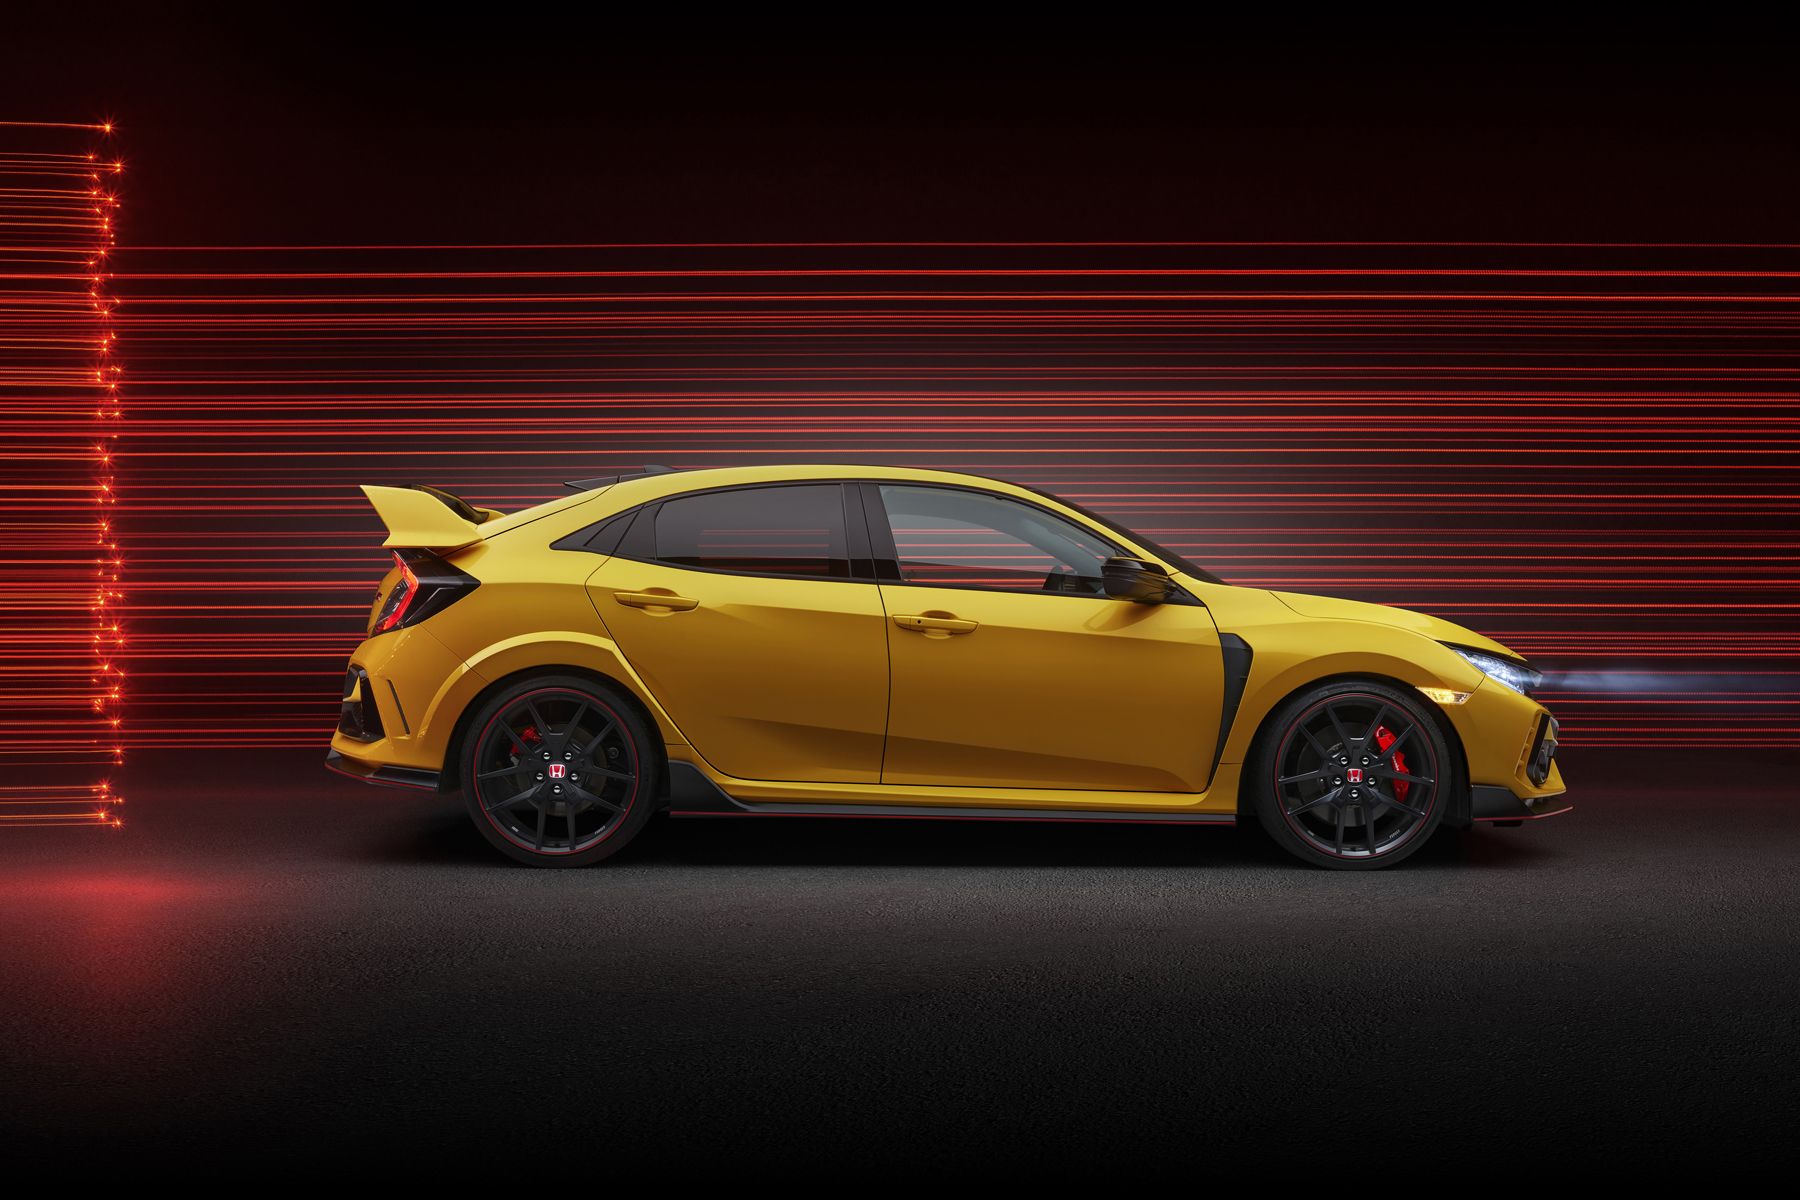 Honda Civic Type R: See The Changes Side By Side